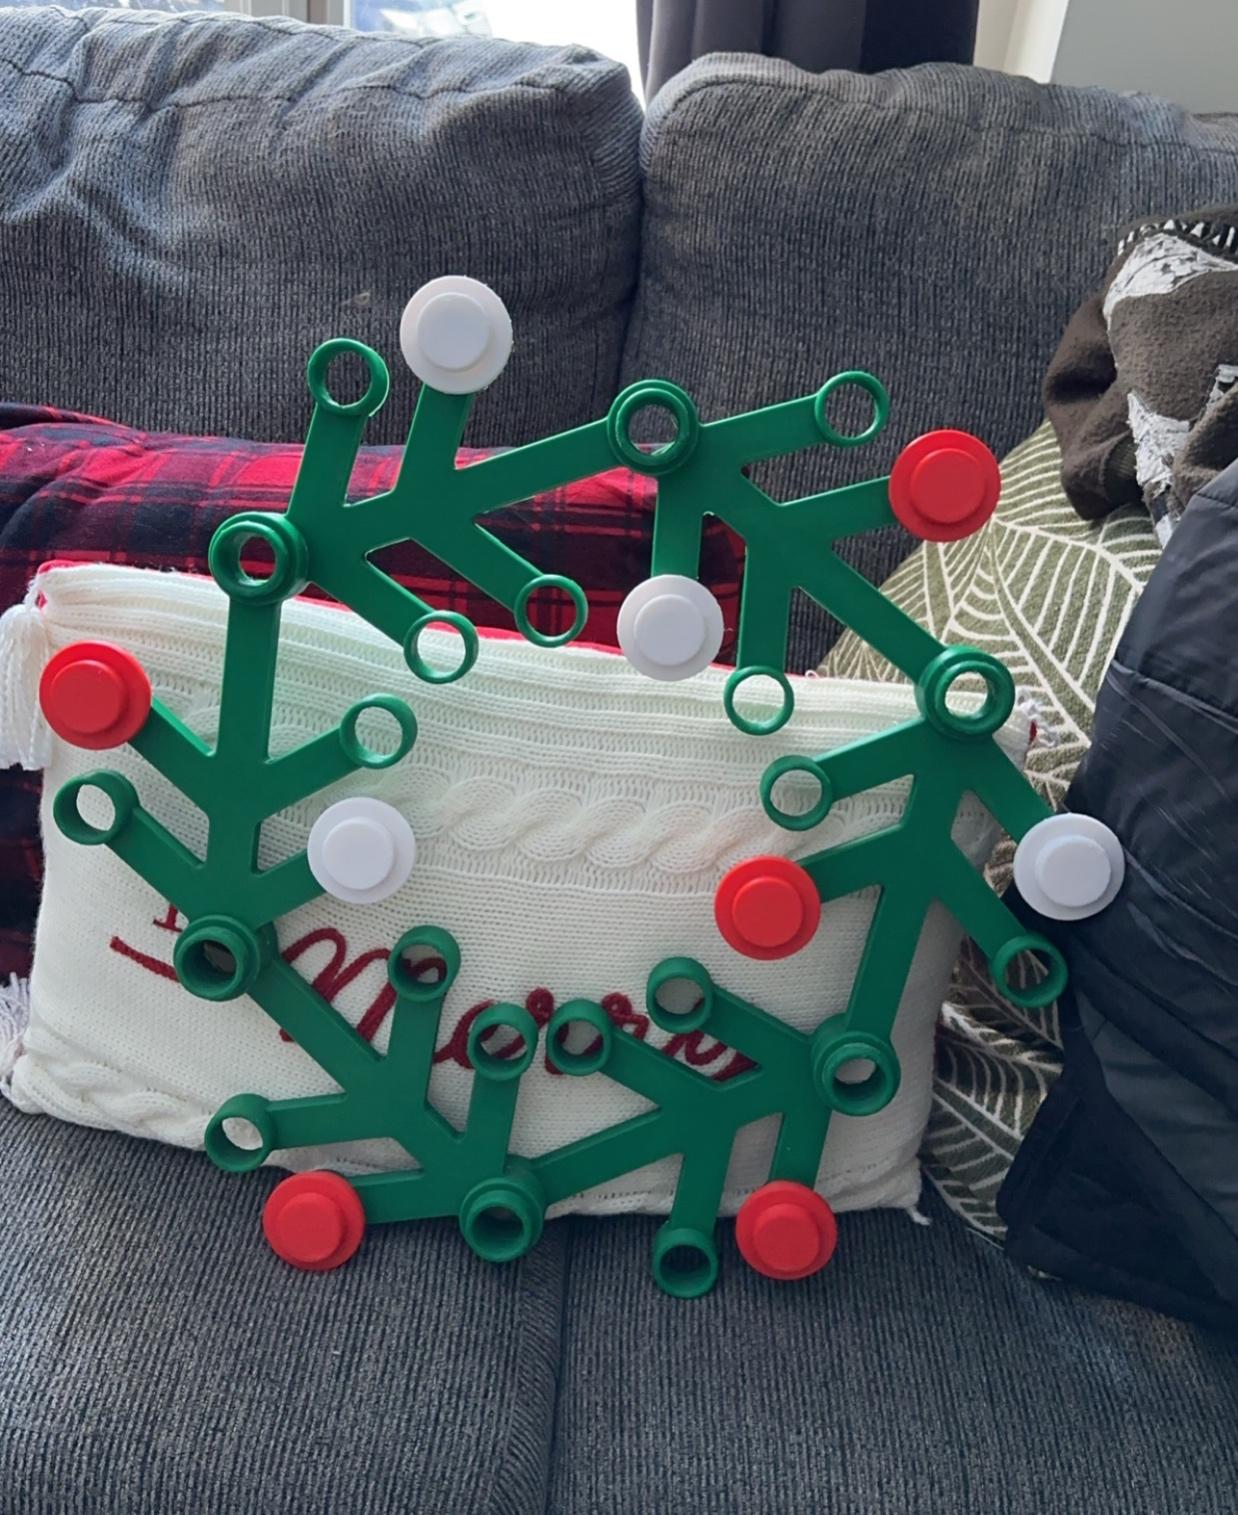 BIG LEt'GO Holiday Wreath! - 200% NO SUPPORTS! - It’s huuuuuge! 😂 I think it’s fun but the wife refuses to let me hang it up. She says “My mother would love that” in an effort to get it out of the house. 😂😂😂 - 3d model